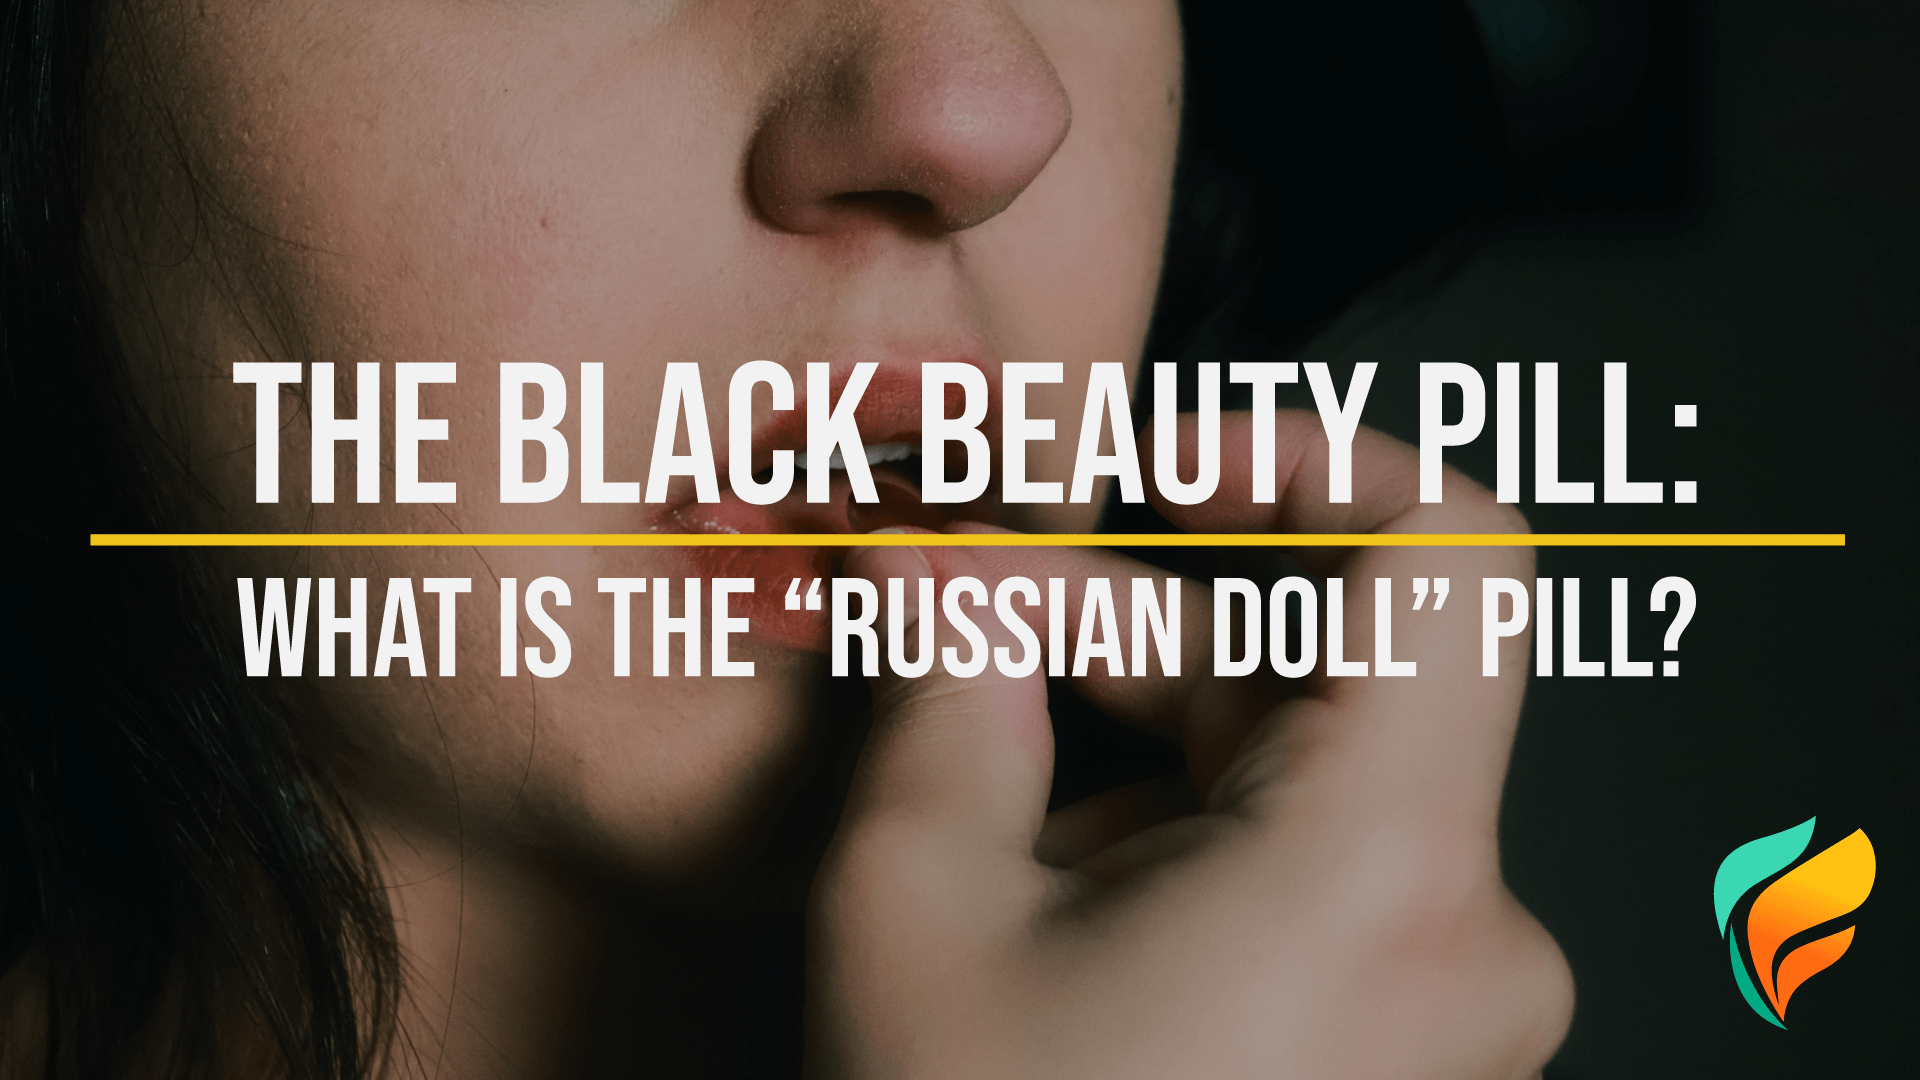 Black Beauty Pill: What is the “Russian Doll Drug” and is it Addictive?